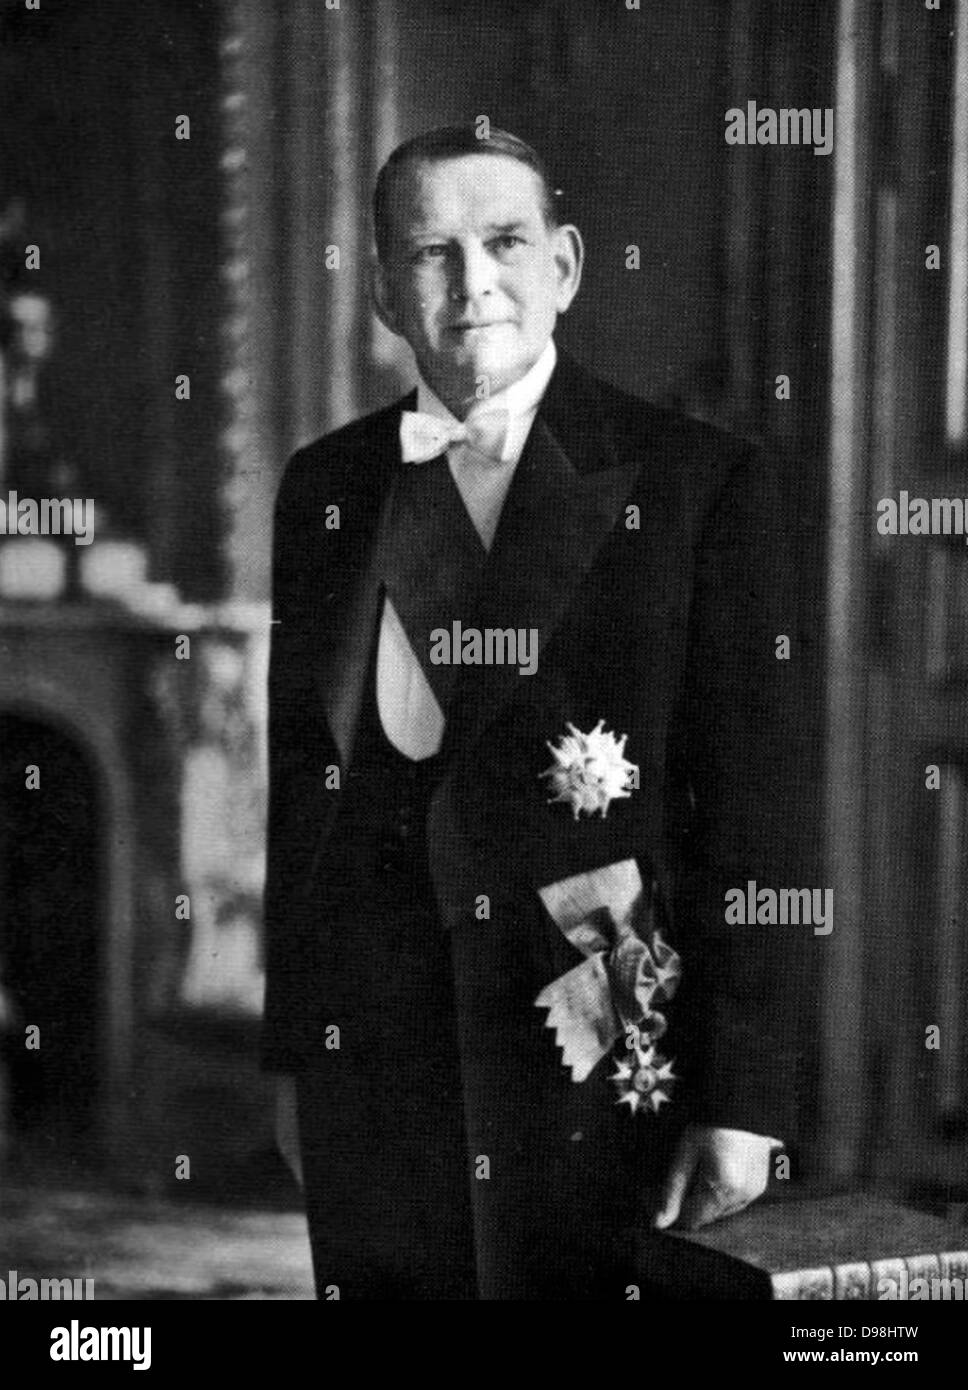 René Jules Gustave Coty  1882 – 1962) was President of France from 1954 to 1959. He was the second and last president under the French Fourth Republic. Stock Photo